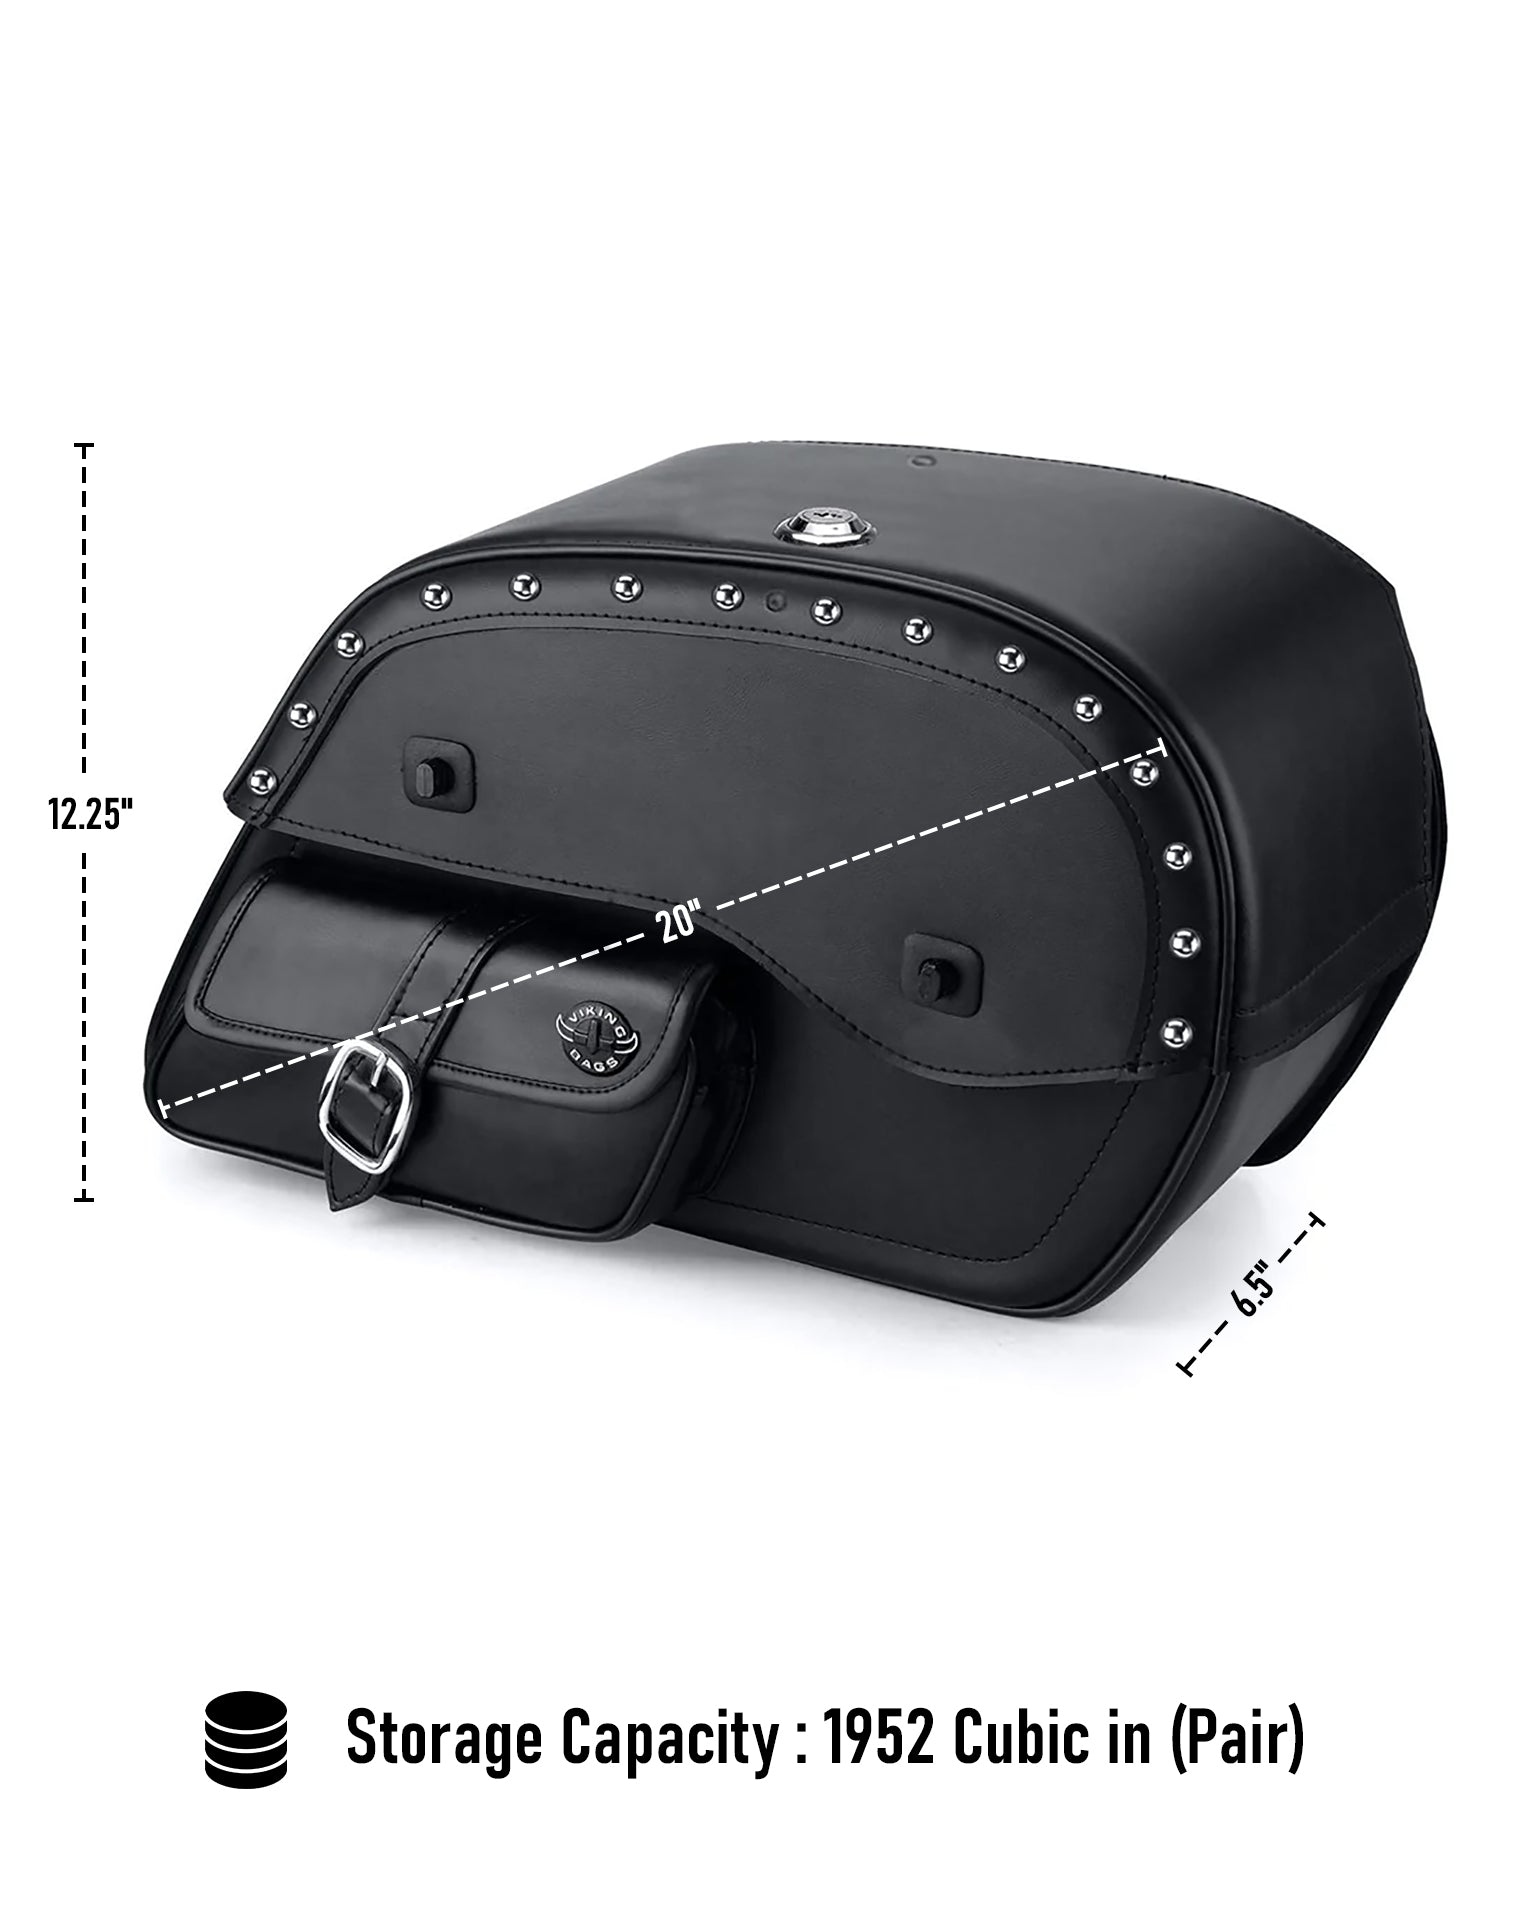 Viking Essential Side Pocket Large Kawasaki Vulcan 750 Vn750 Leather Studded Motorcycle Saddlebags Weather Resistant Bags Comes in Pair